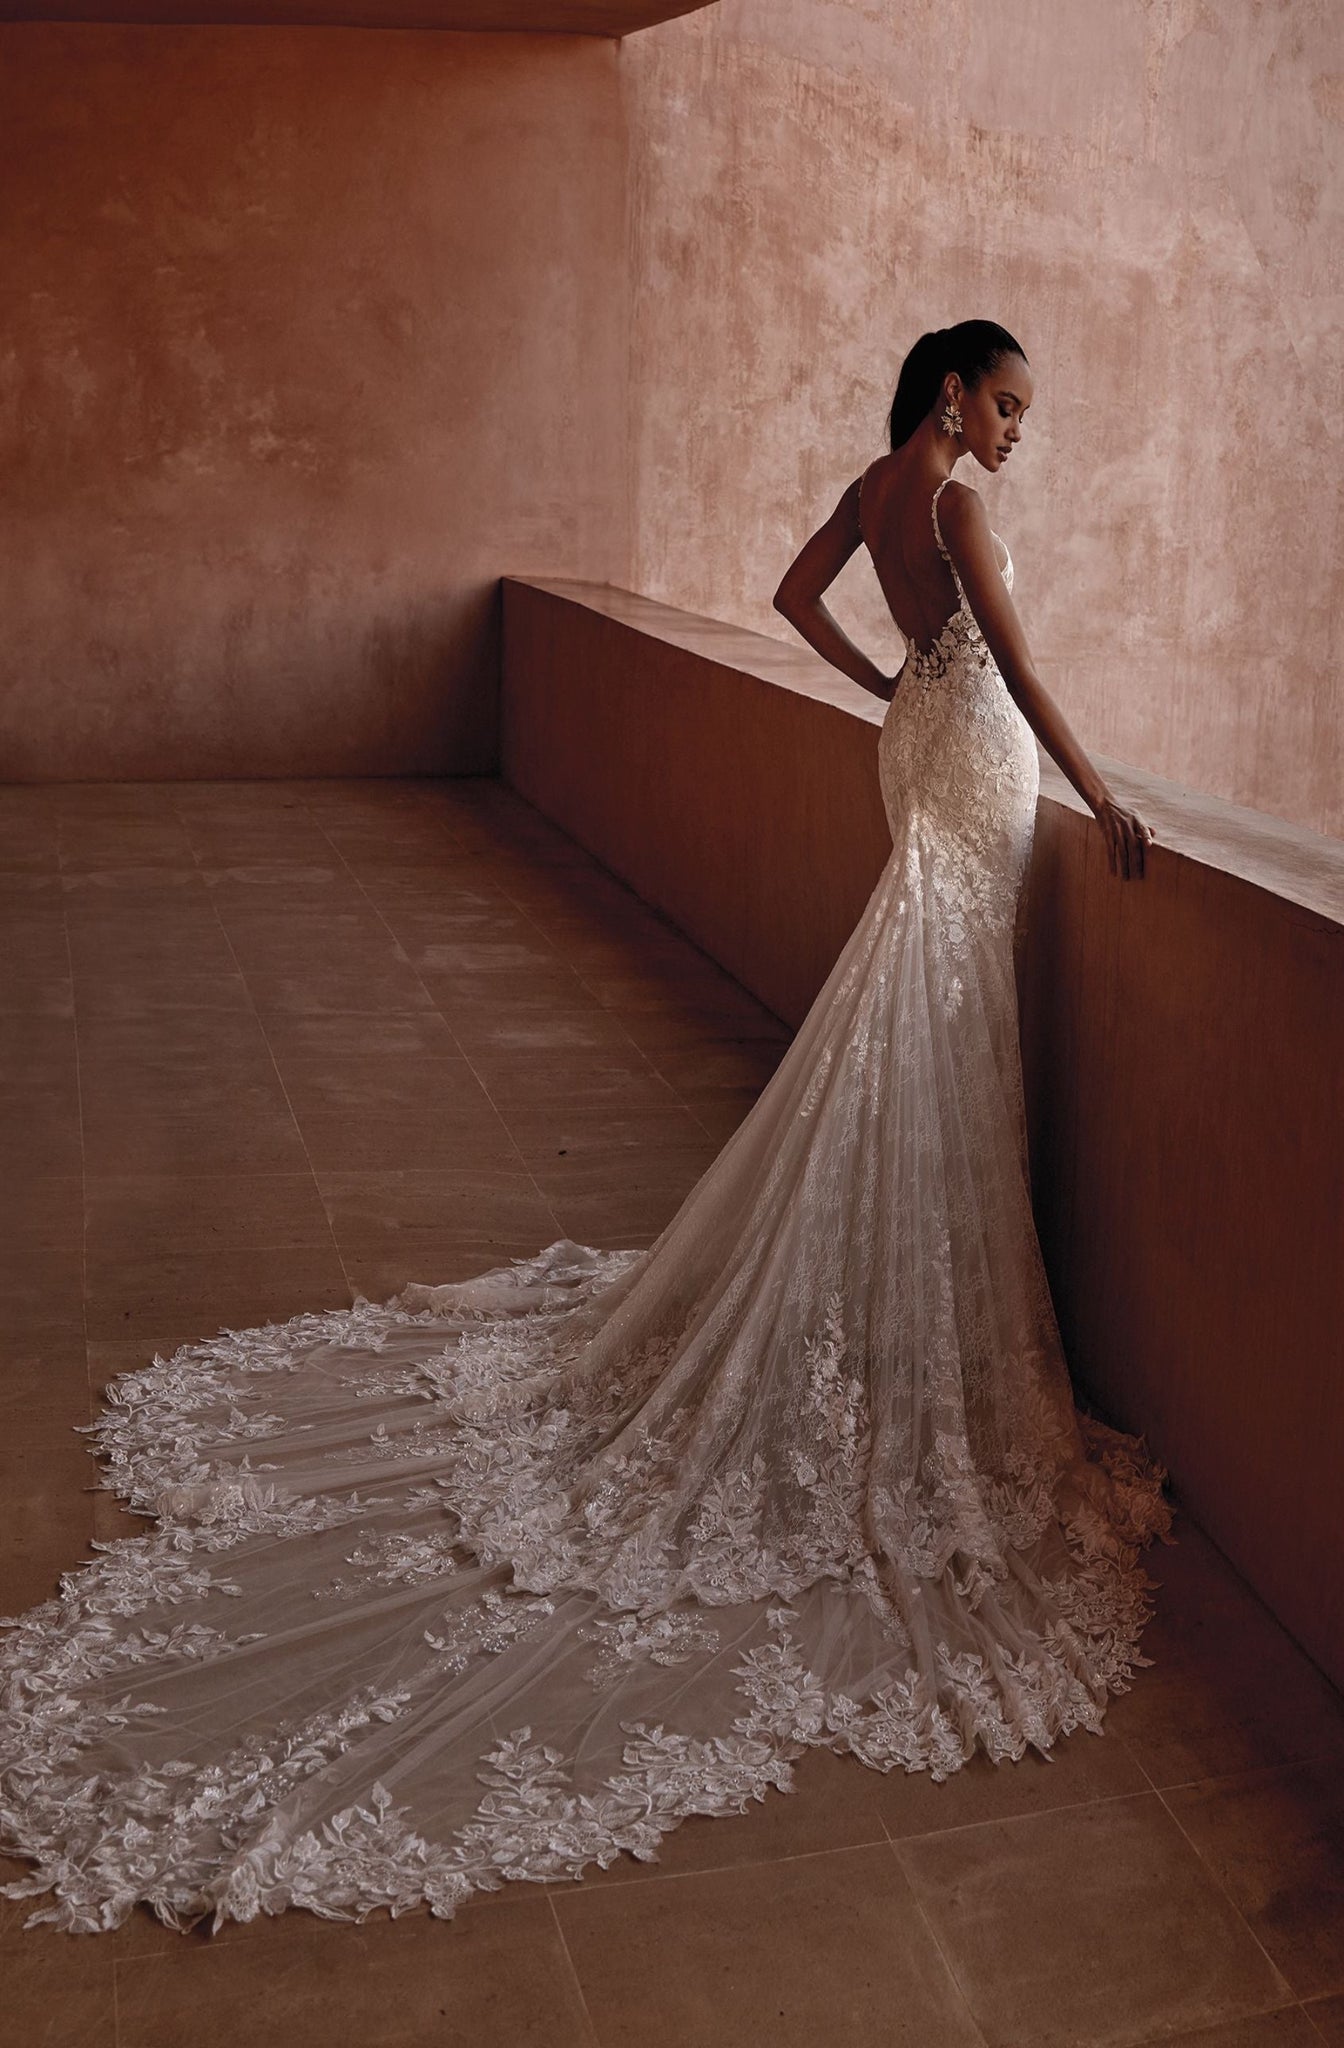 Hera Couture New Wedding Dress Arrivals and Recent Collections｜anna bé  bridal boutique